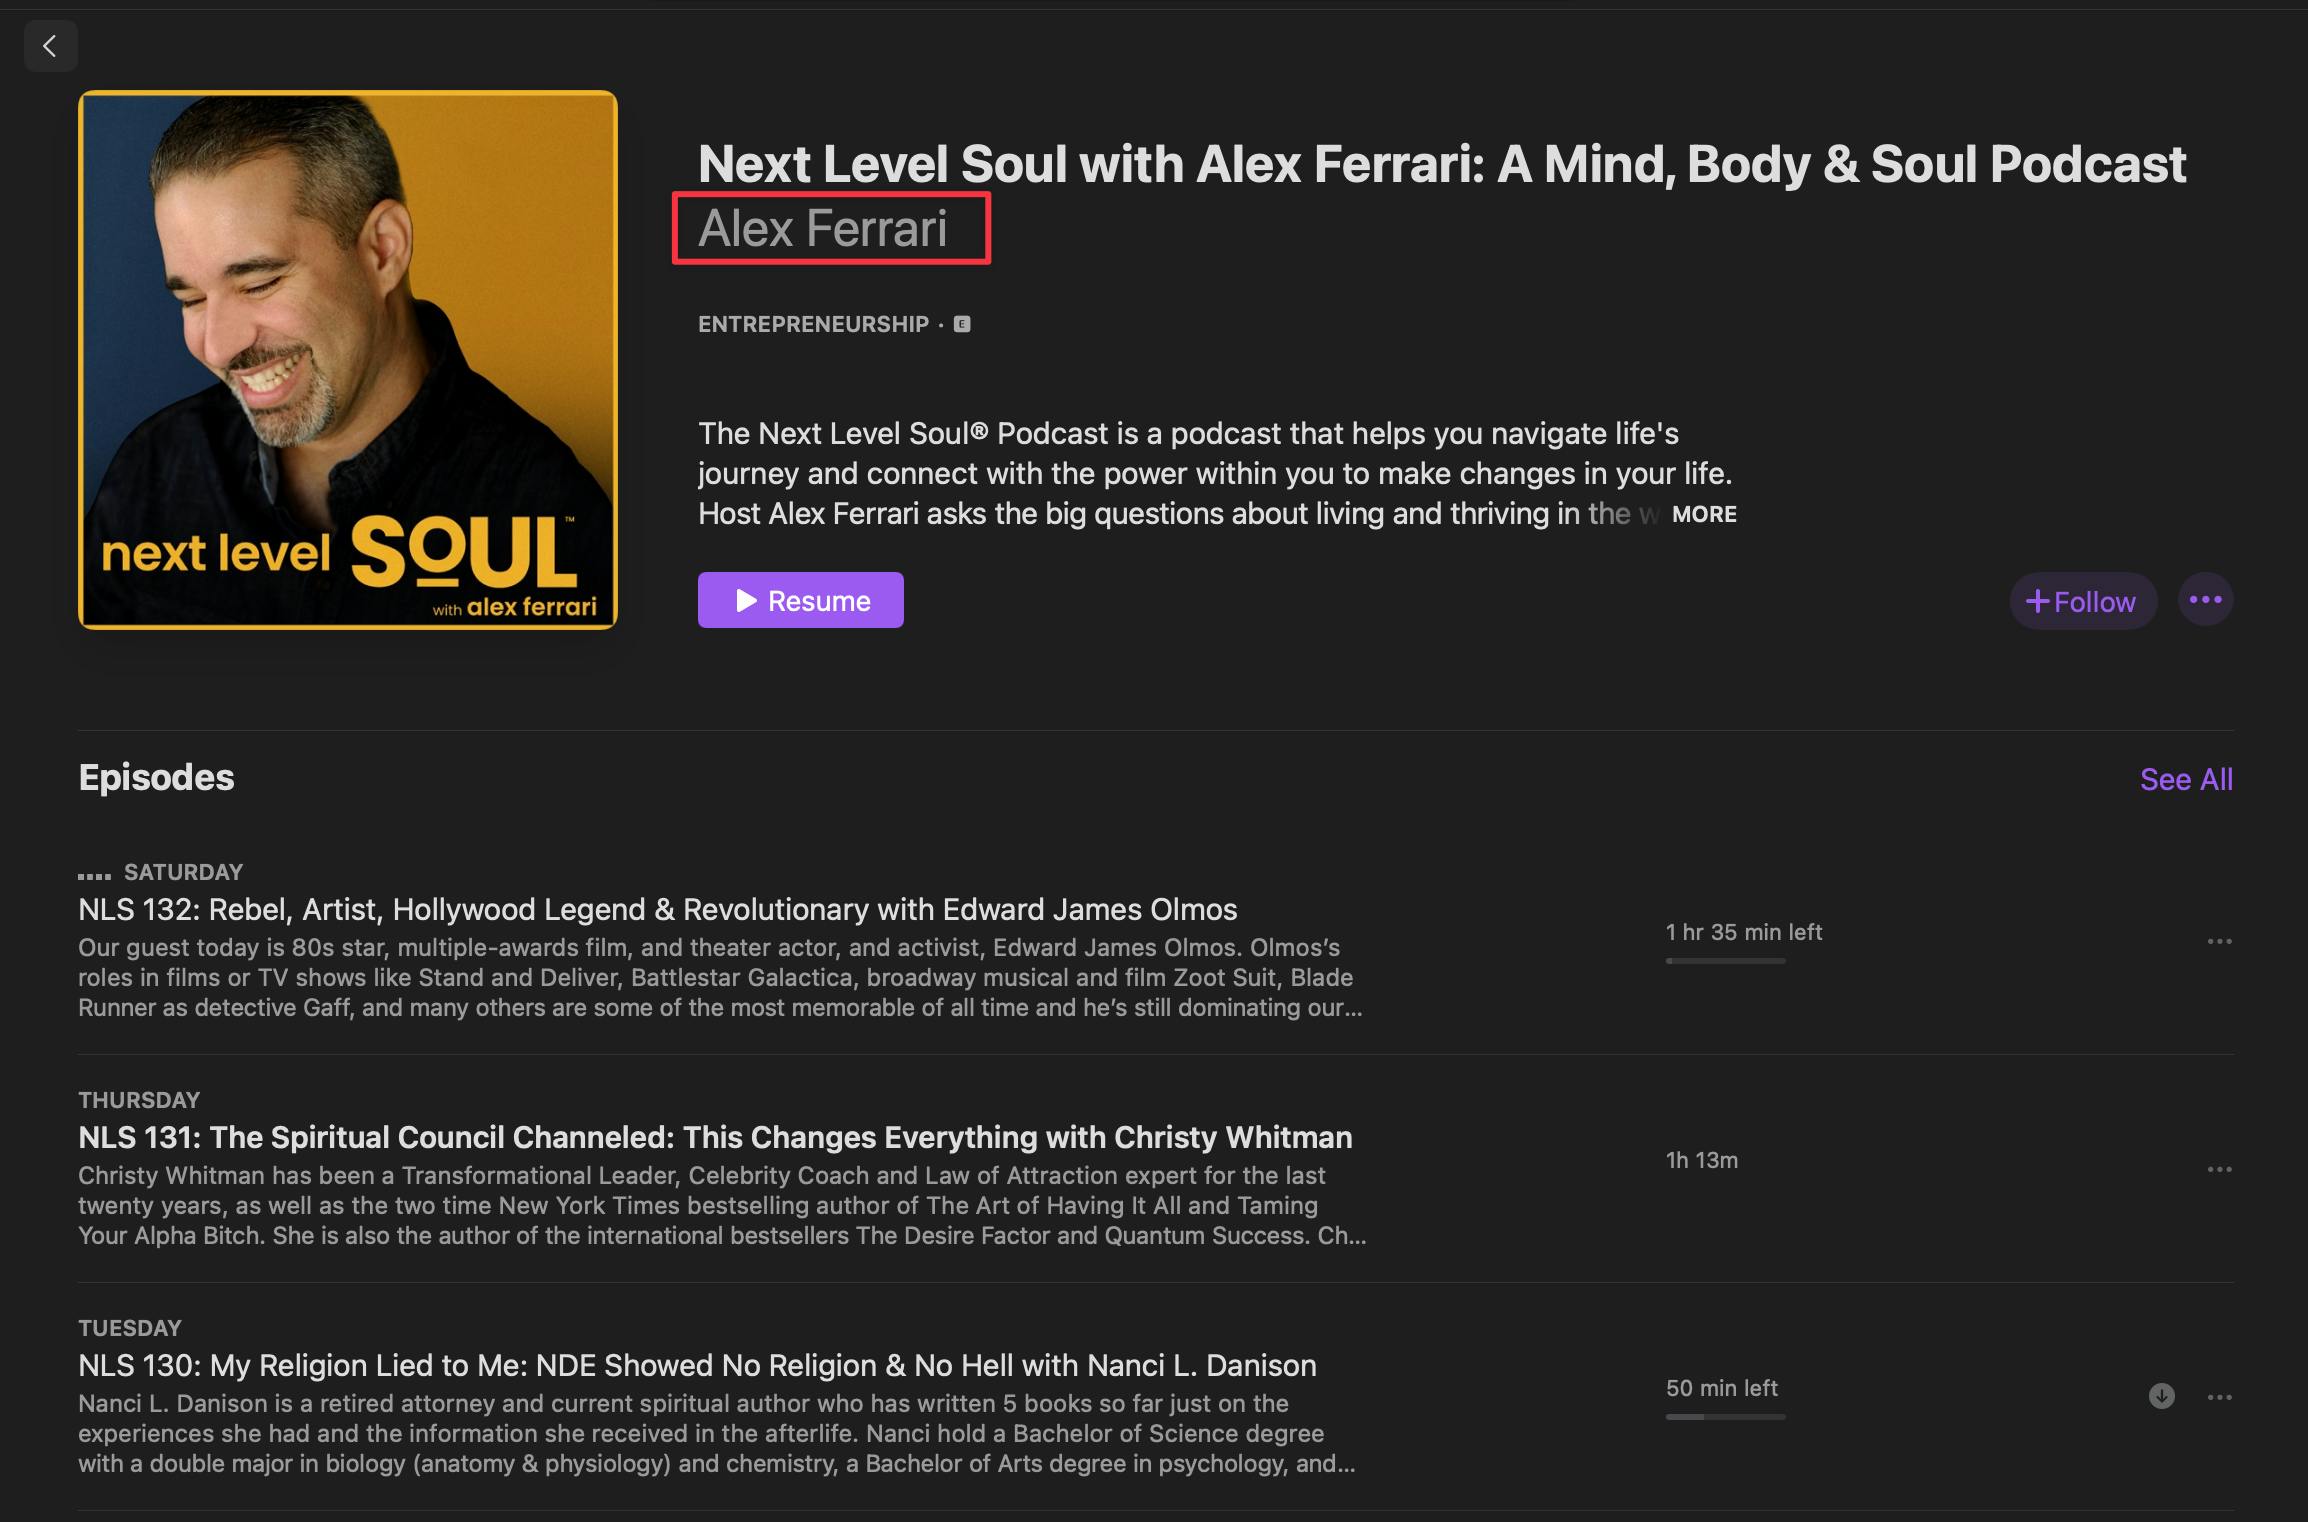 Next Level Soul Apple Podcasts page with red box around host's name